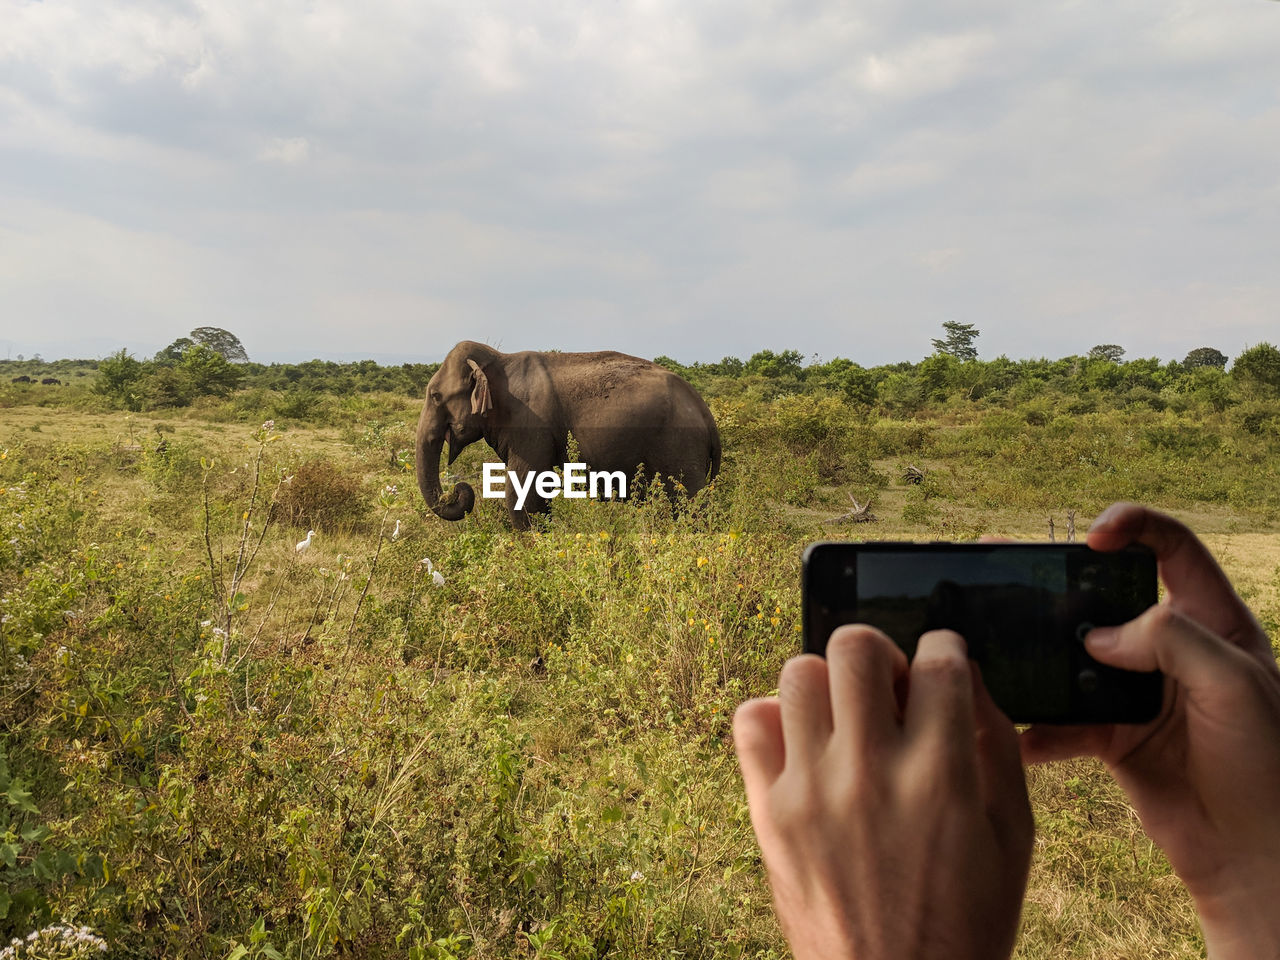 Taking a photo of an elephant using a mobile phone